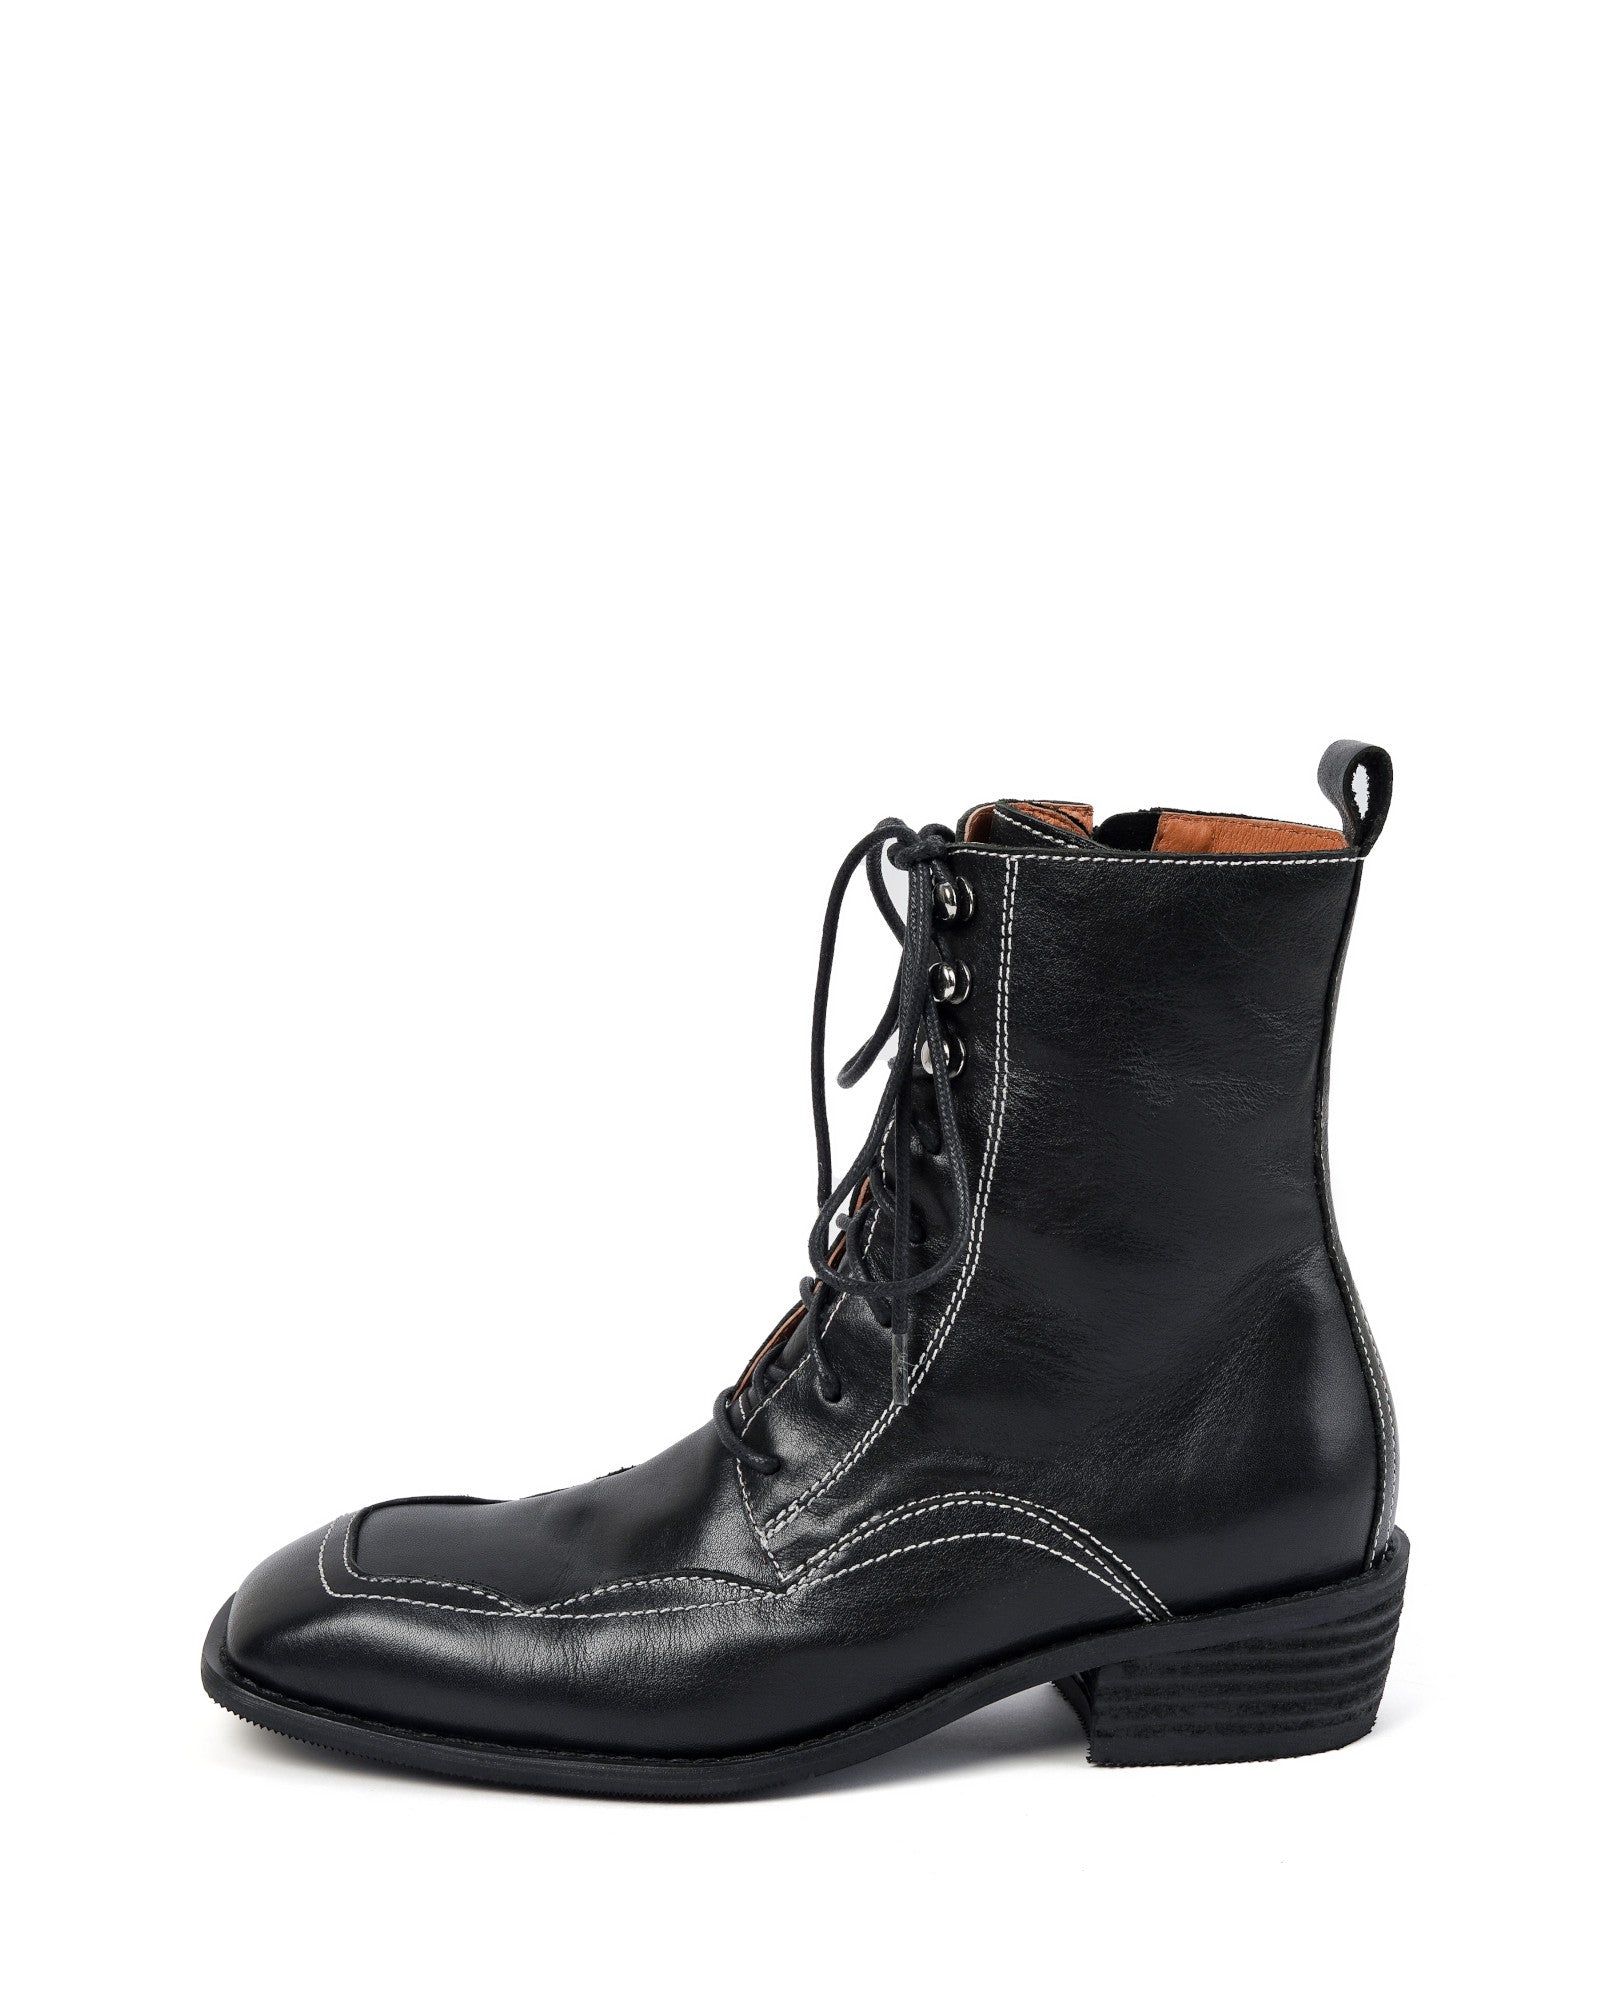 Foria-topstitching-leather-boots-1